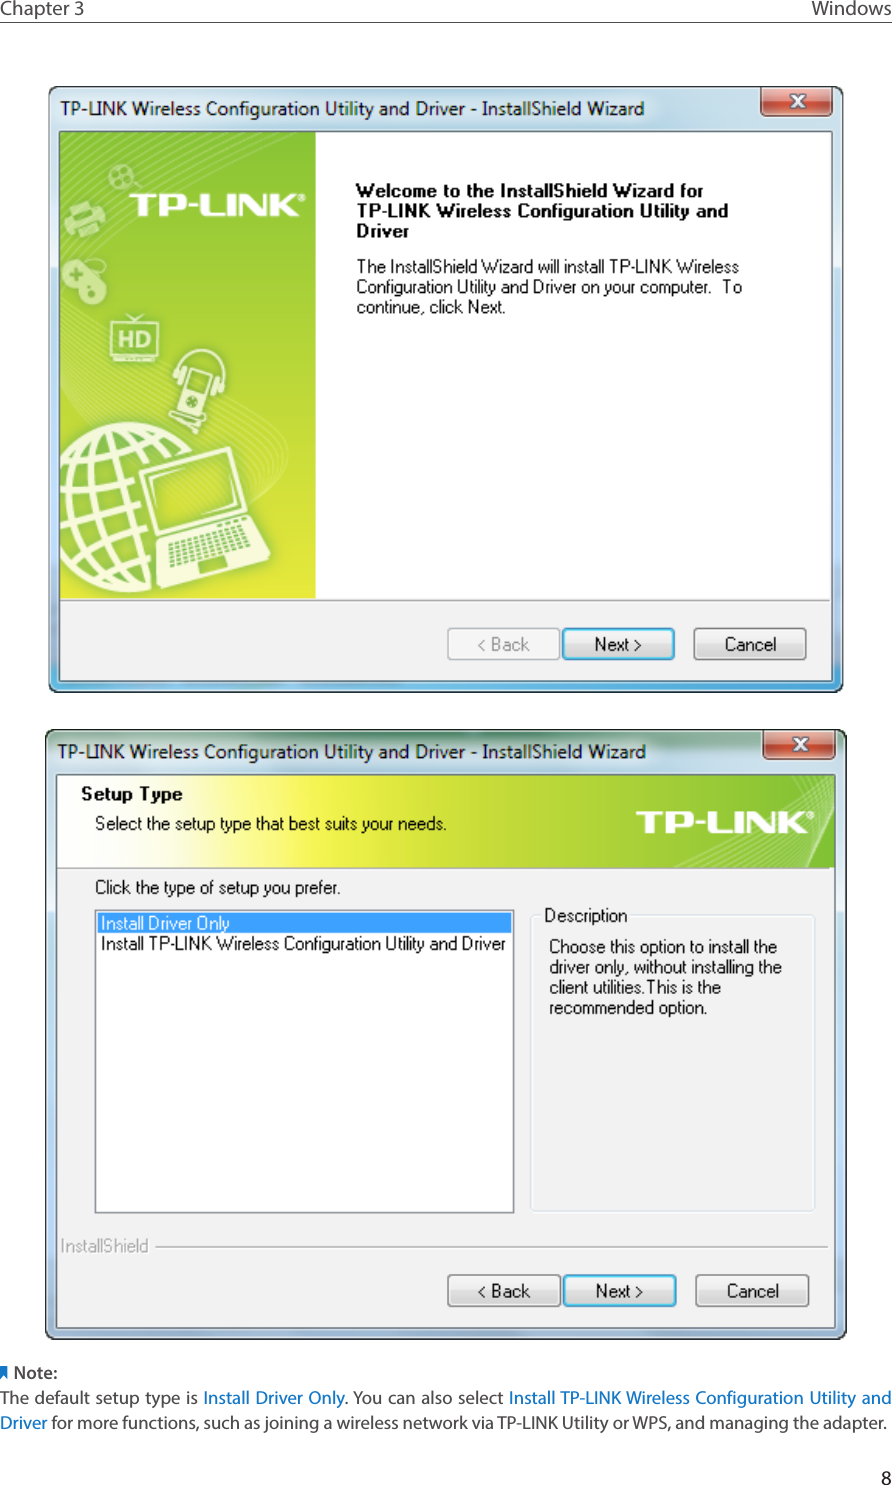 8Chapter 3 WindowsNote:The default setup type is Install Driver Only. You can also select Install TP-LINK Wireless Configuration Utility and Driver for more functions, such as joining a wireless network via TP-LINK Utility or WPS, and managing the adapter.